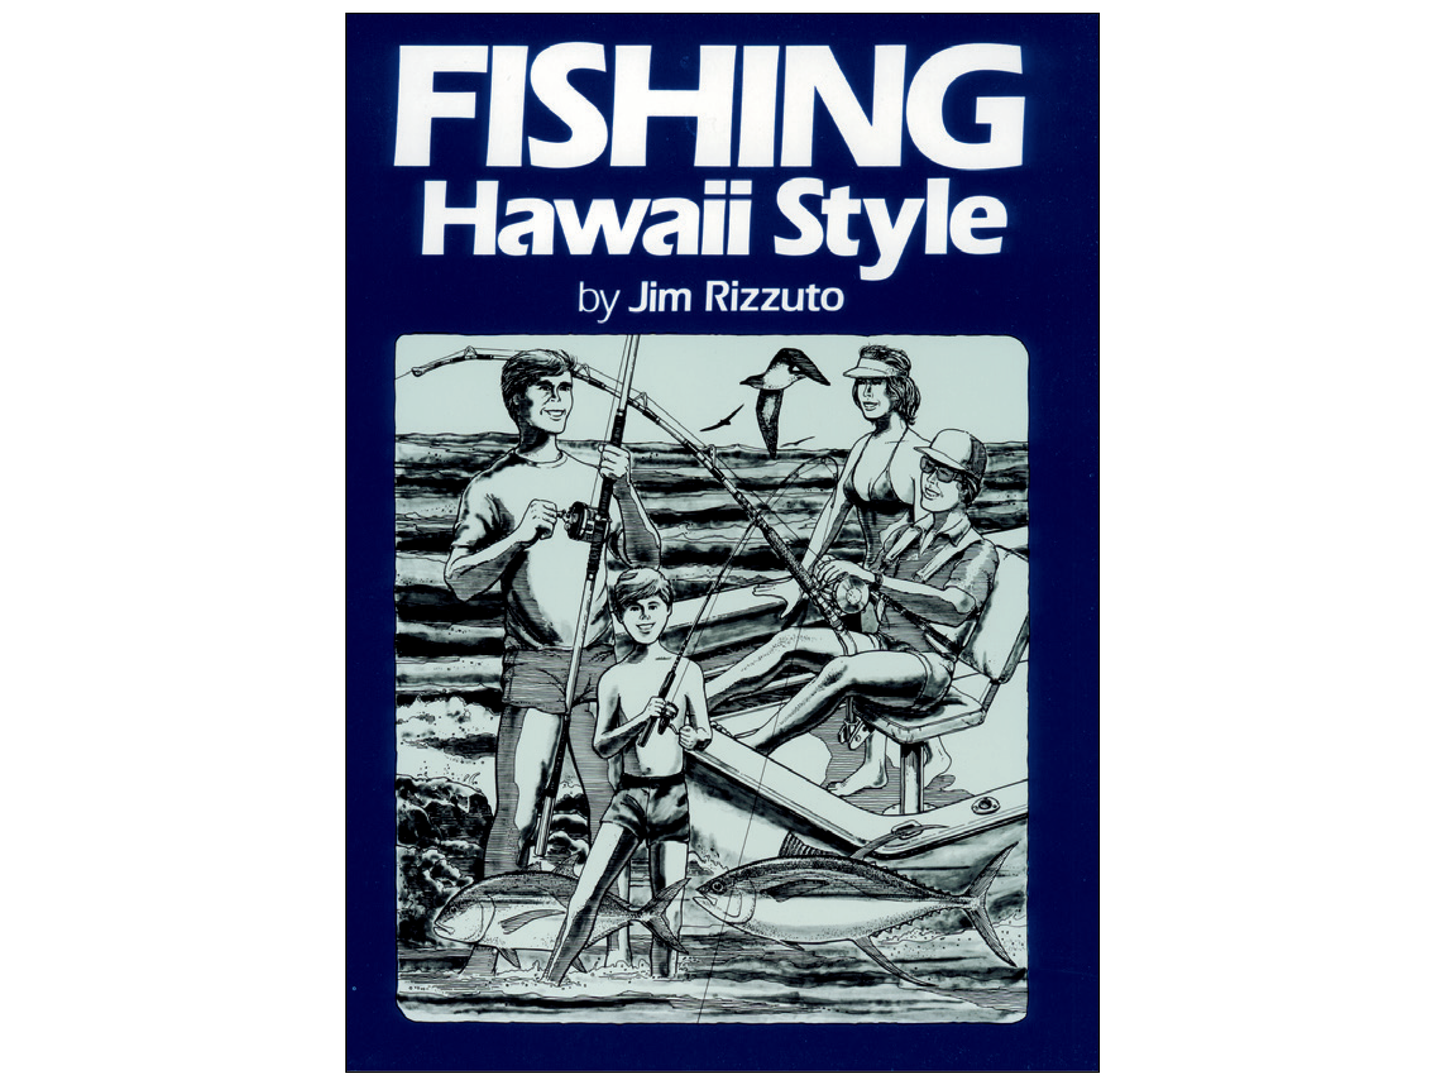 Fishing Hawaii Style Vol. 1  - SOLD OUT